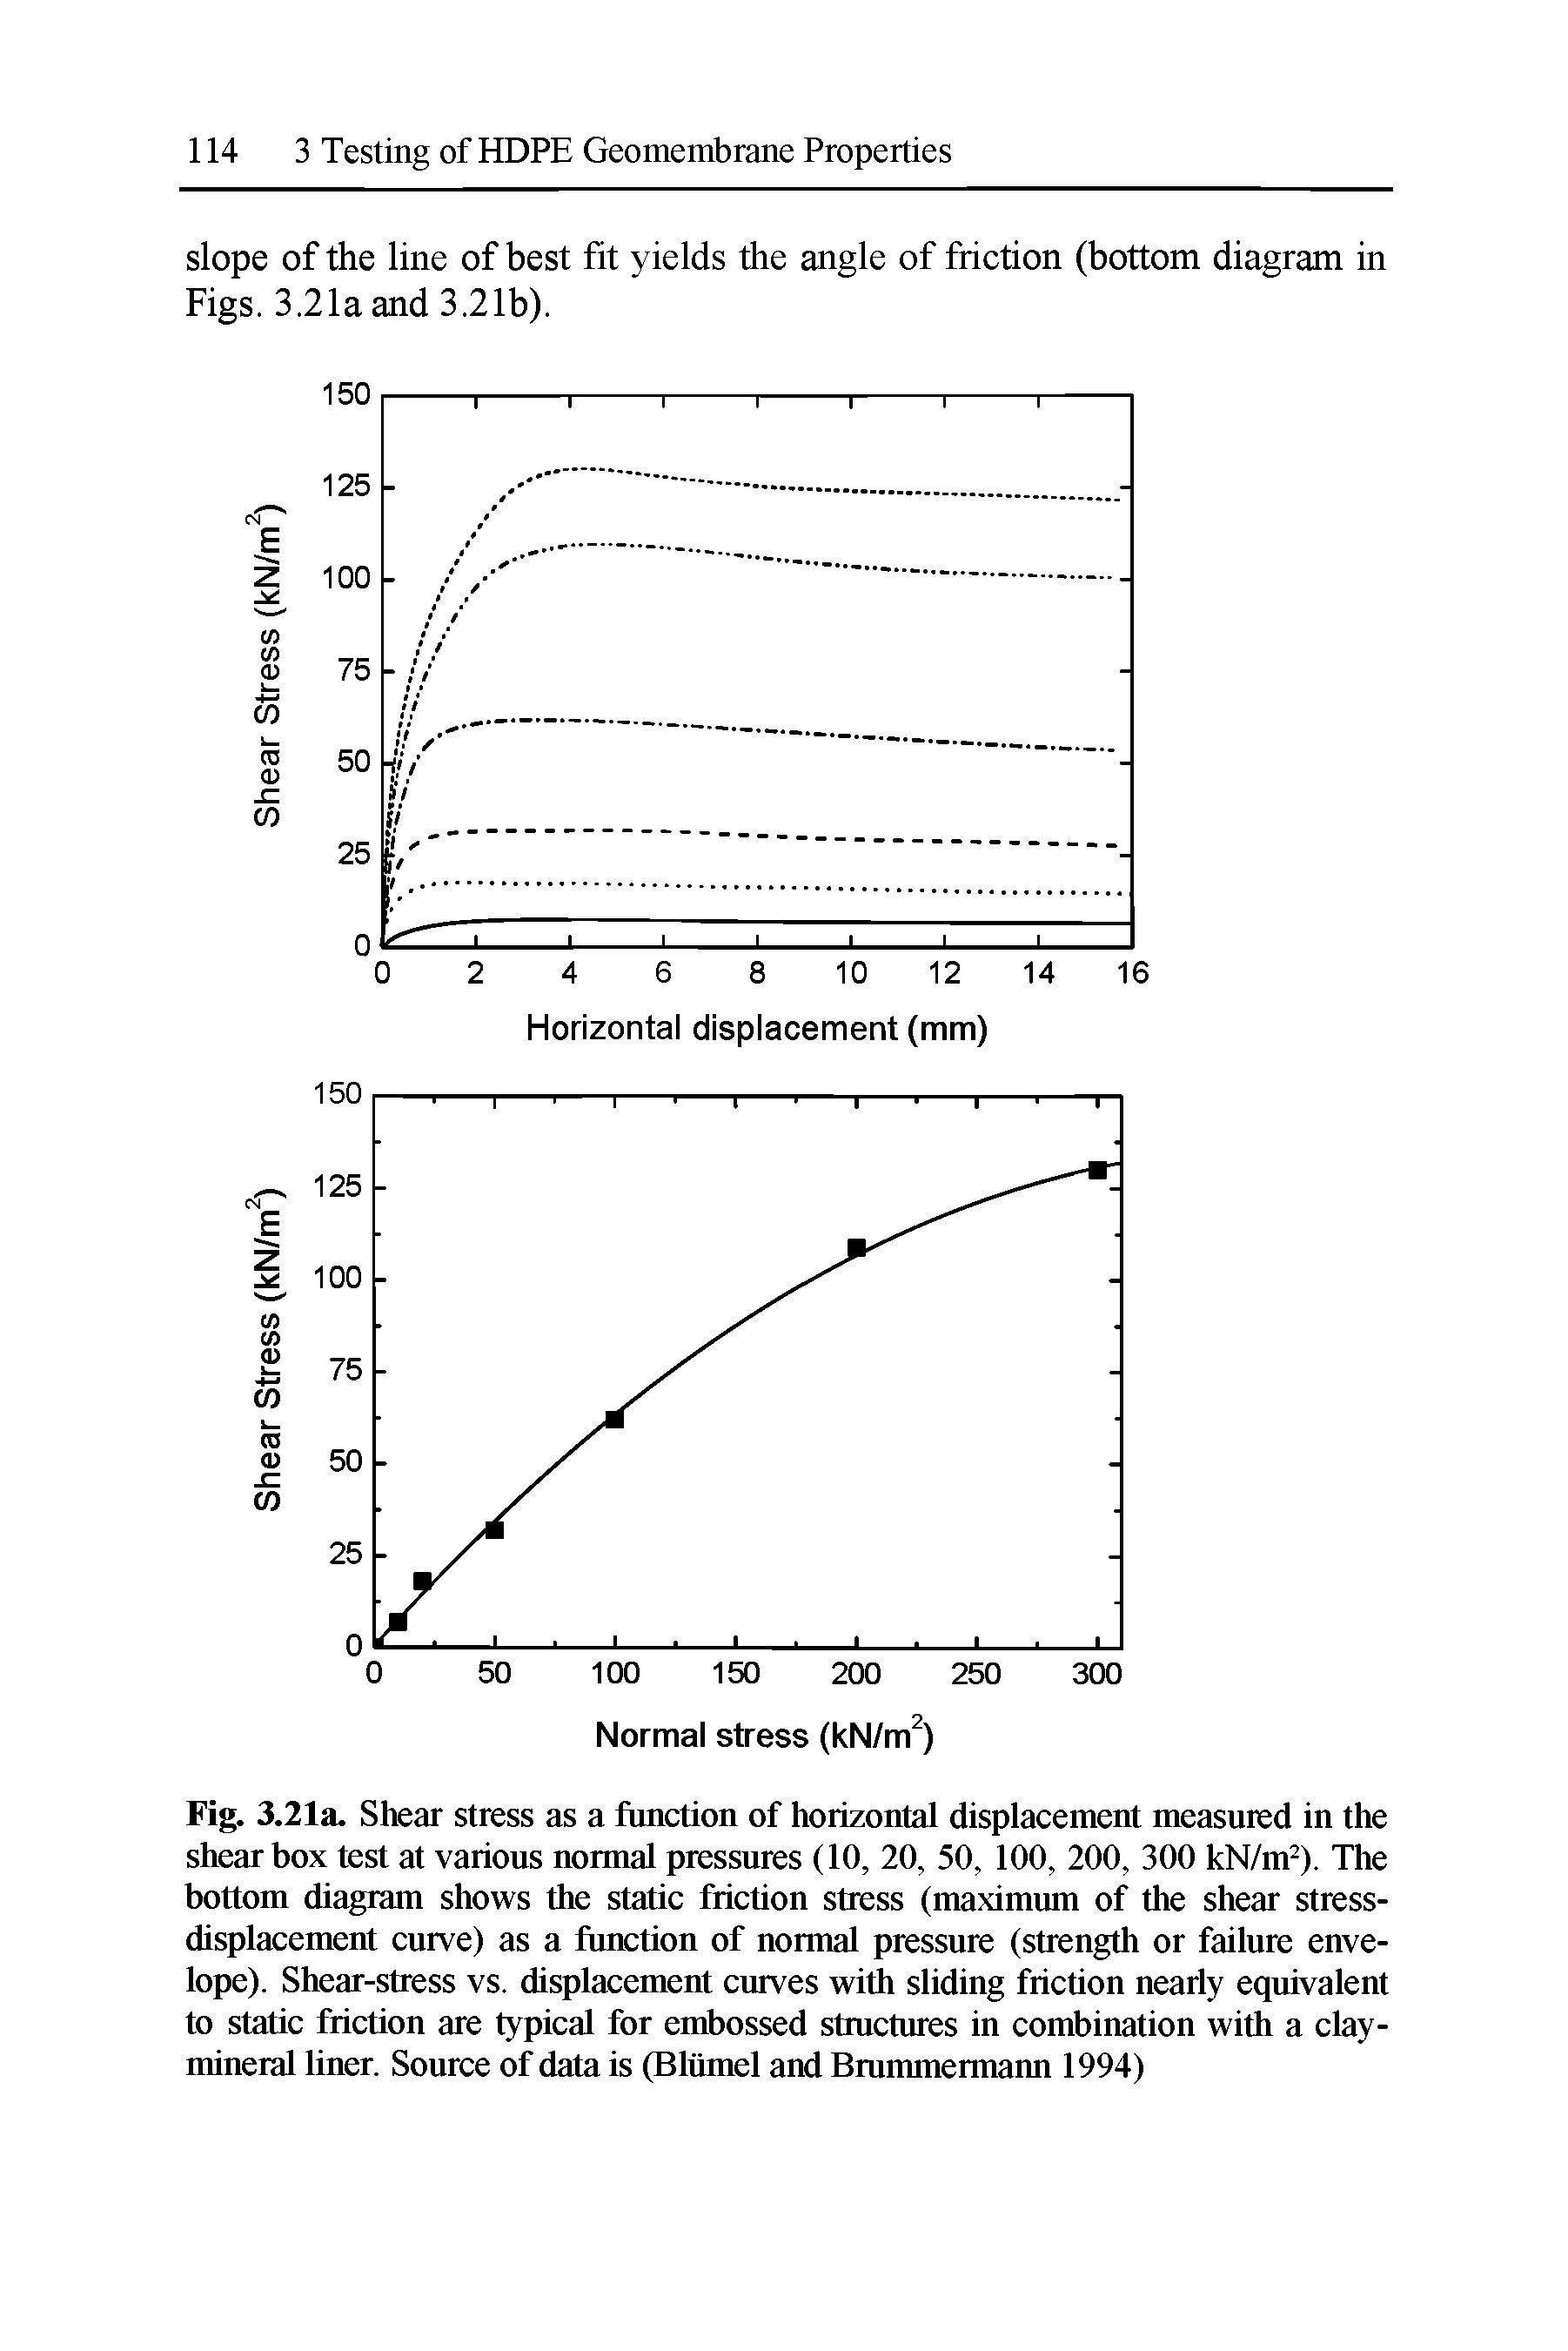 Fig. 3.21a. Shear stress as a function of horizontal displacement measured in the shear box test at various normal pressures (10, 20, 50, 100, 200, 300 kN/m ). The bottom diagram shows the static friction stress (maximum of the shear stress-displacement curve) as a function of normal pressure (strength or failure envelope). Shear-stress vs. displacement curves wiA sliding friction nearly eqirivalent to static friction are typical for embossed stractures in combination with a clay-mineral liner. Source of data is (Bliimel and Bmnunermarm 1994)...